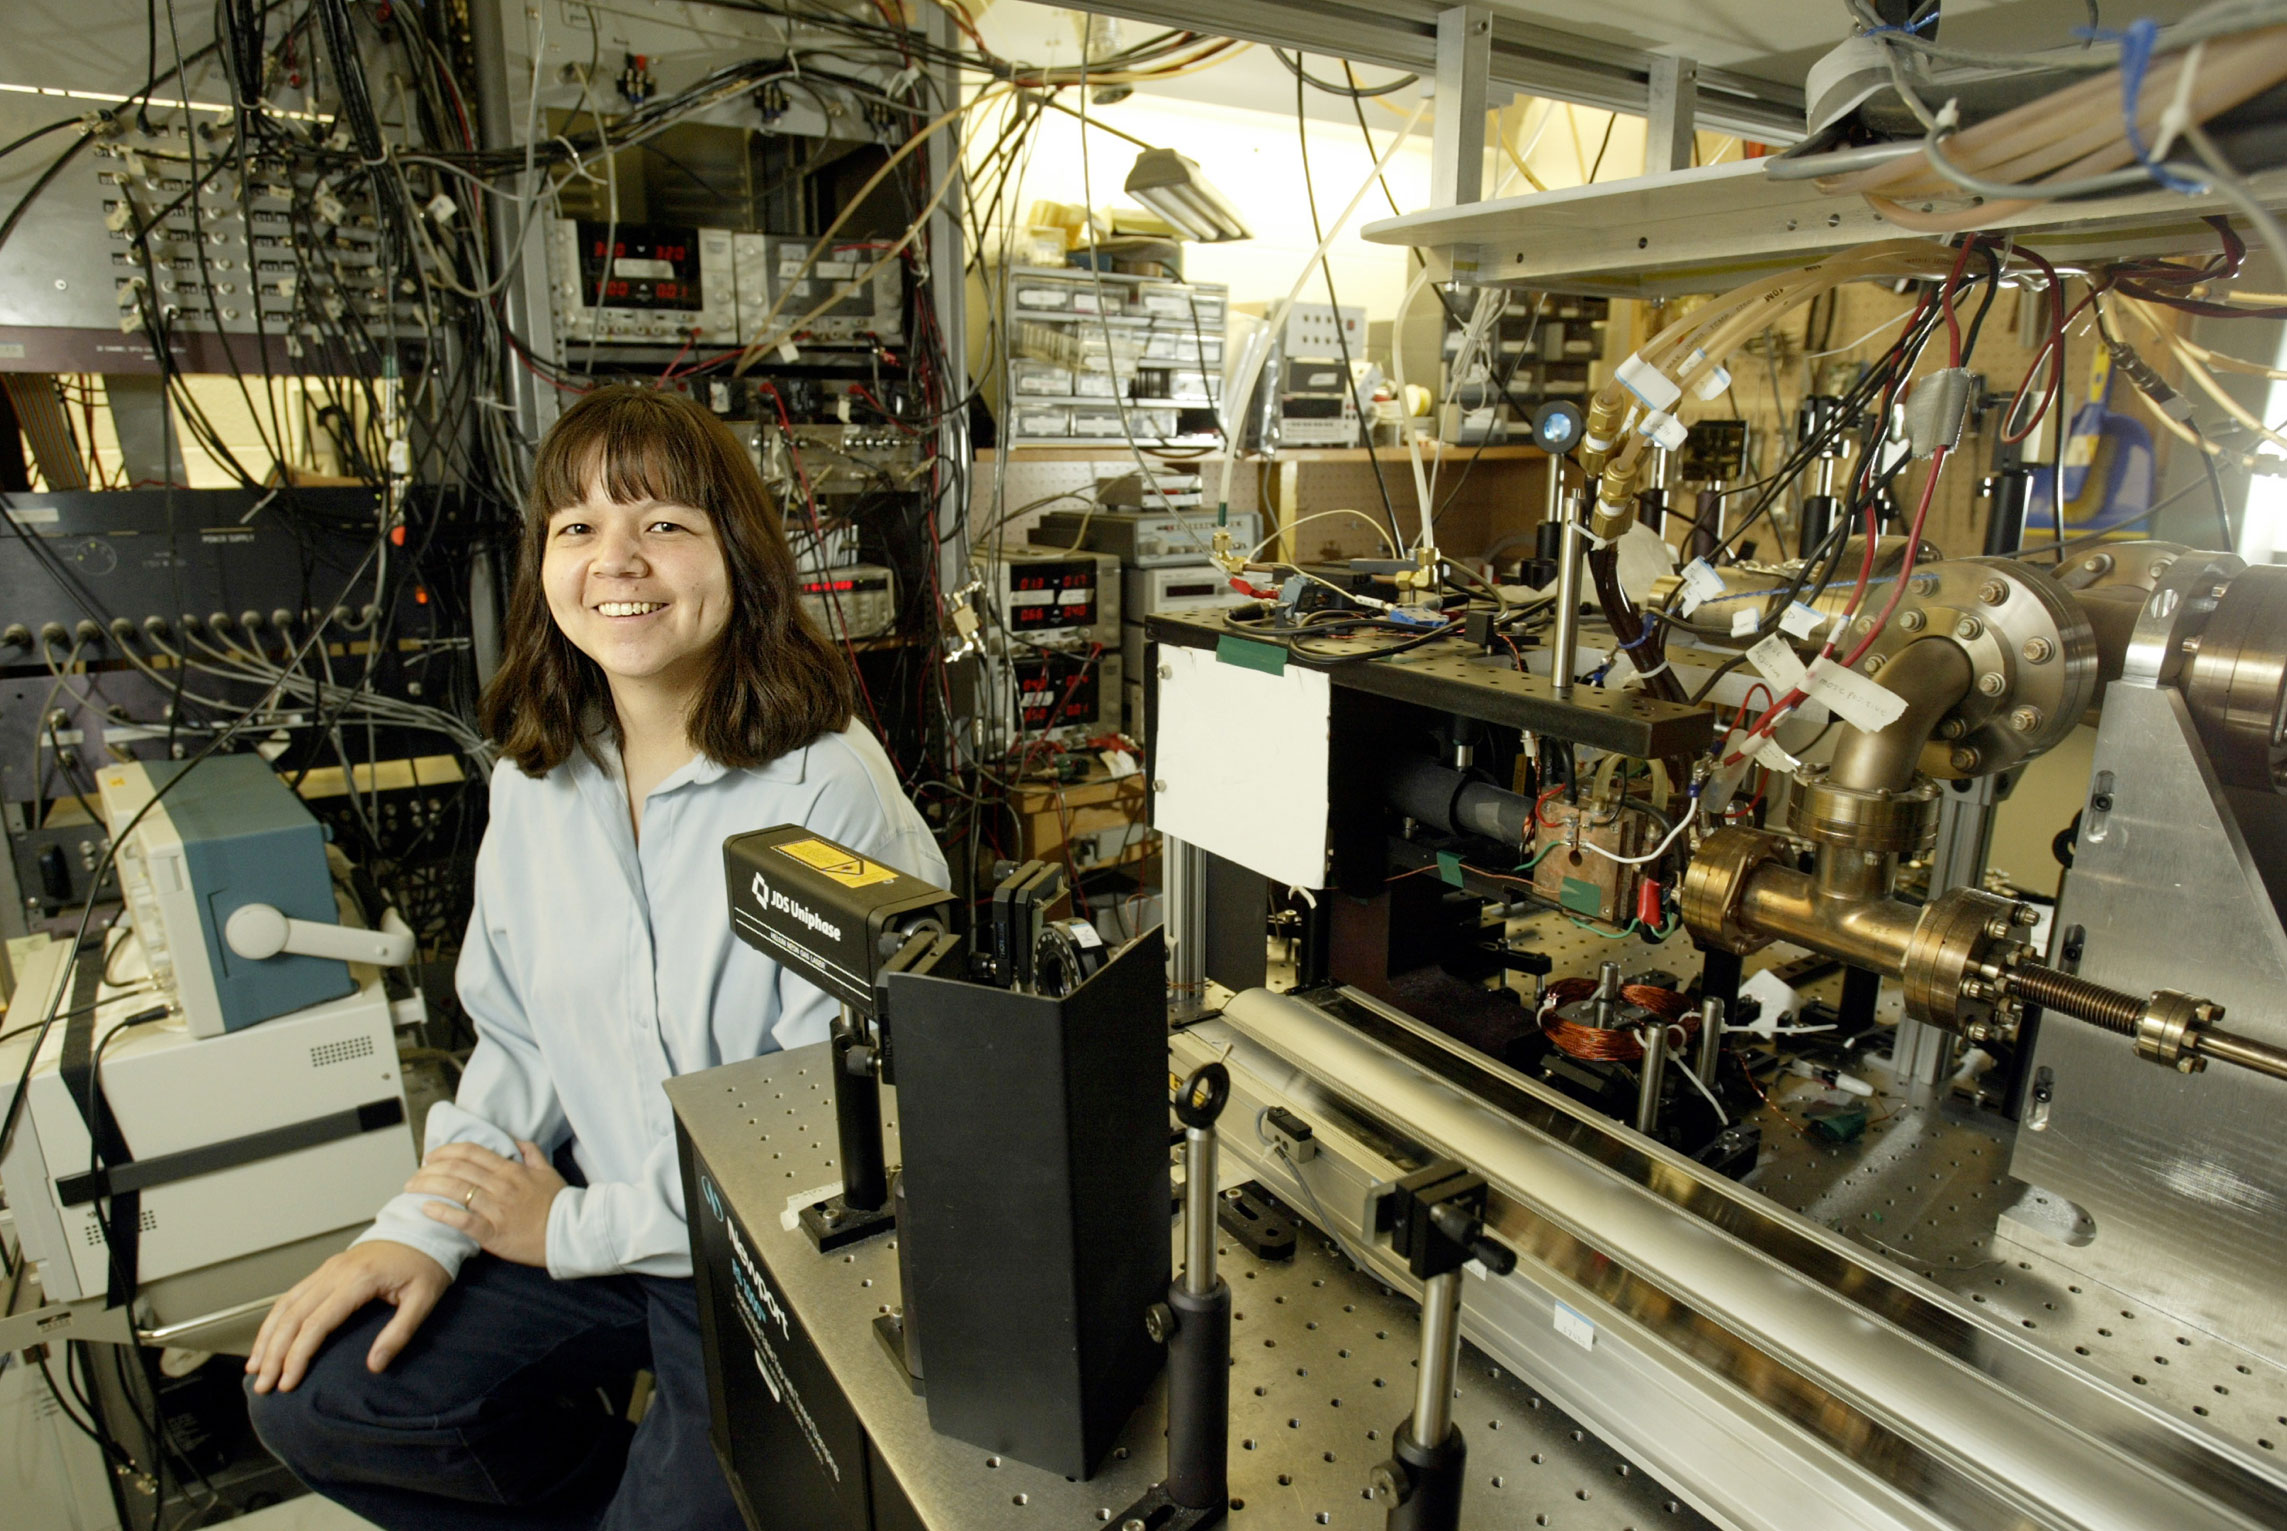 A woman with shoulder length brown hair sits in a Physics lab.